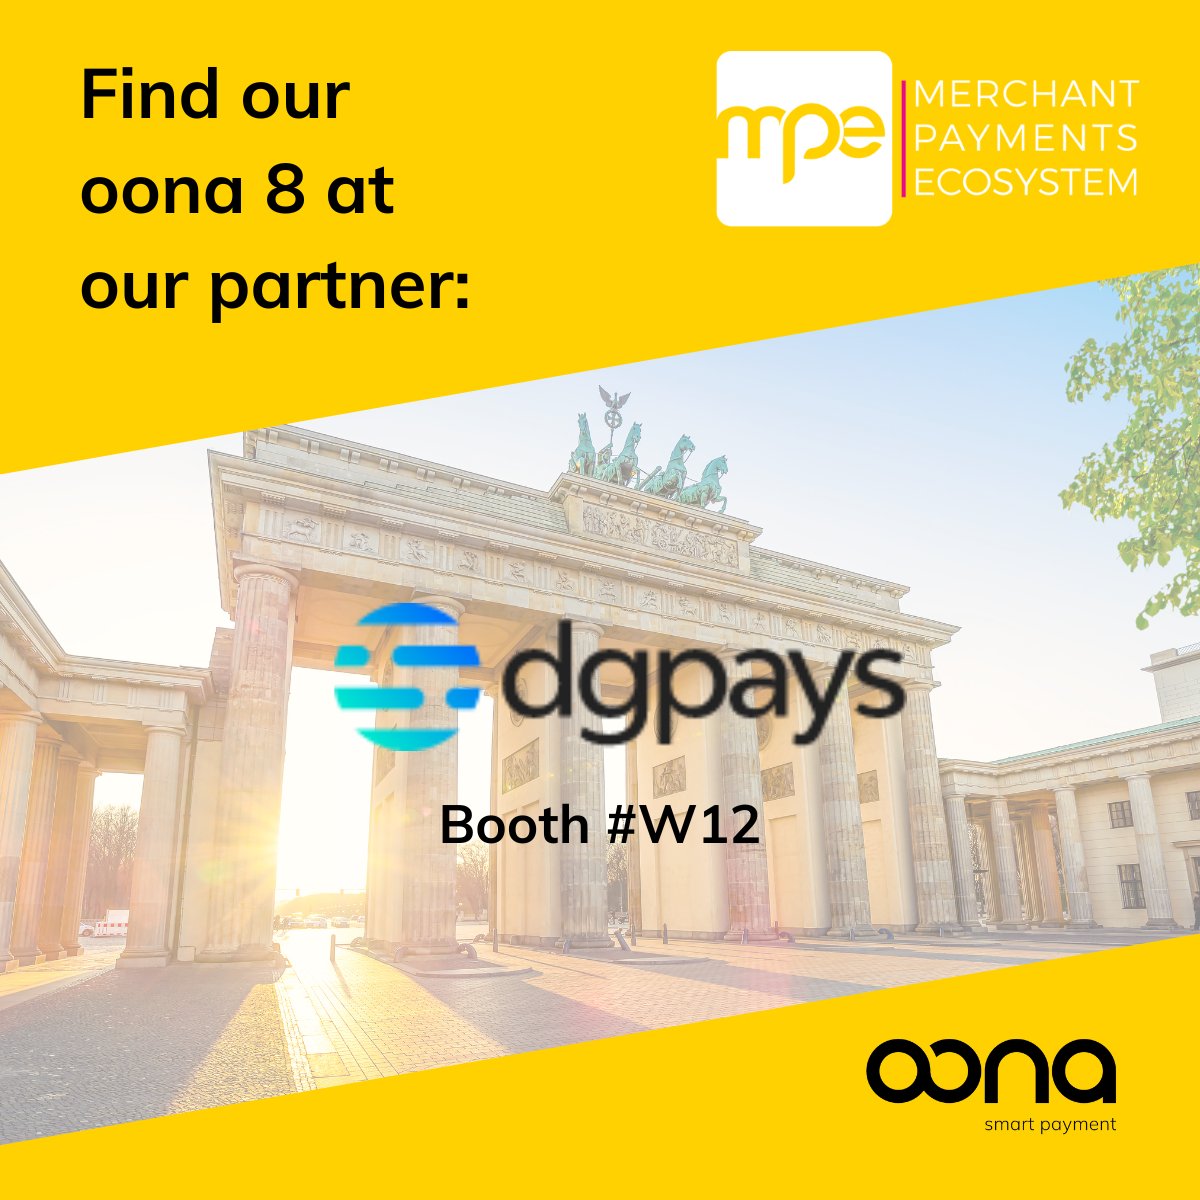 This year we are attending Merchant Payments Ecosystem with our partner Dgpays. 

📆 March 28th - 30th 2023 | Berlin

We present our latest #tablets which are equipped with front facing NFC that makes checkout intuitive and frictionless.

#mpecosystem #mpe2023 @mpecosystem